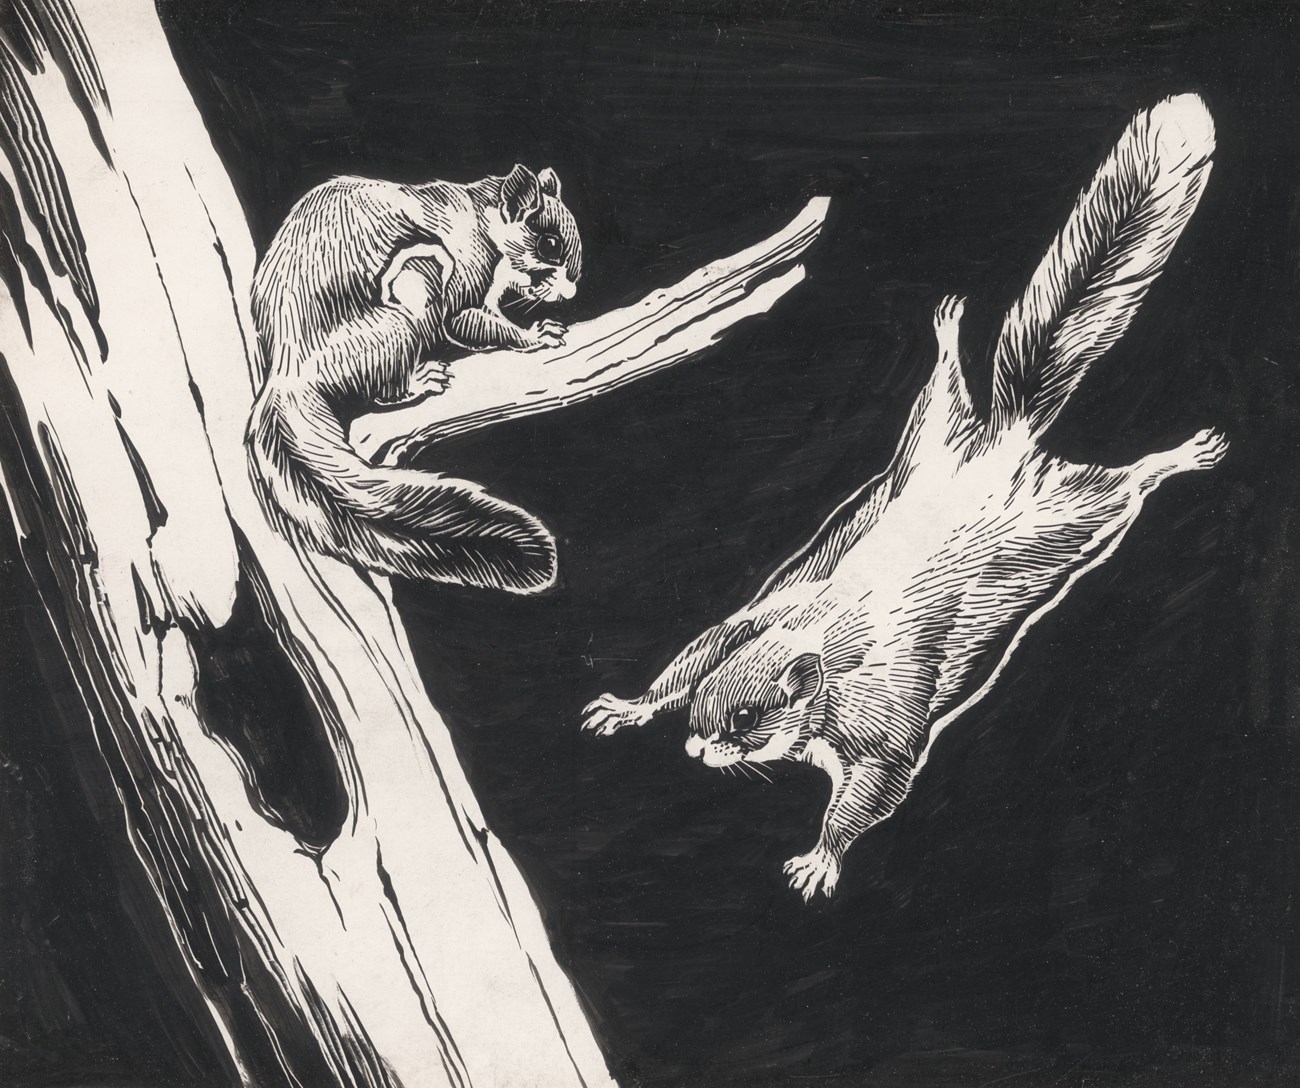 Pen-and-ink drawing of a flying squirrel